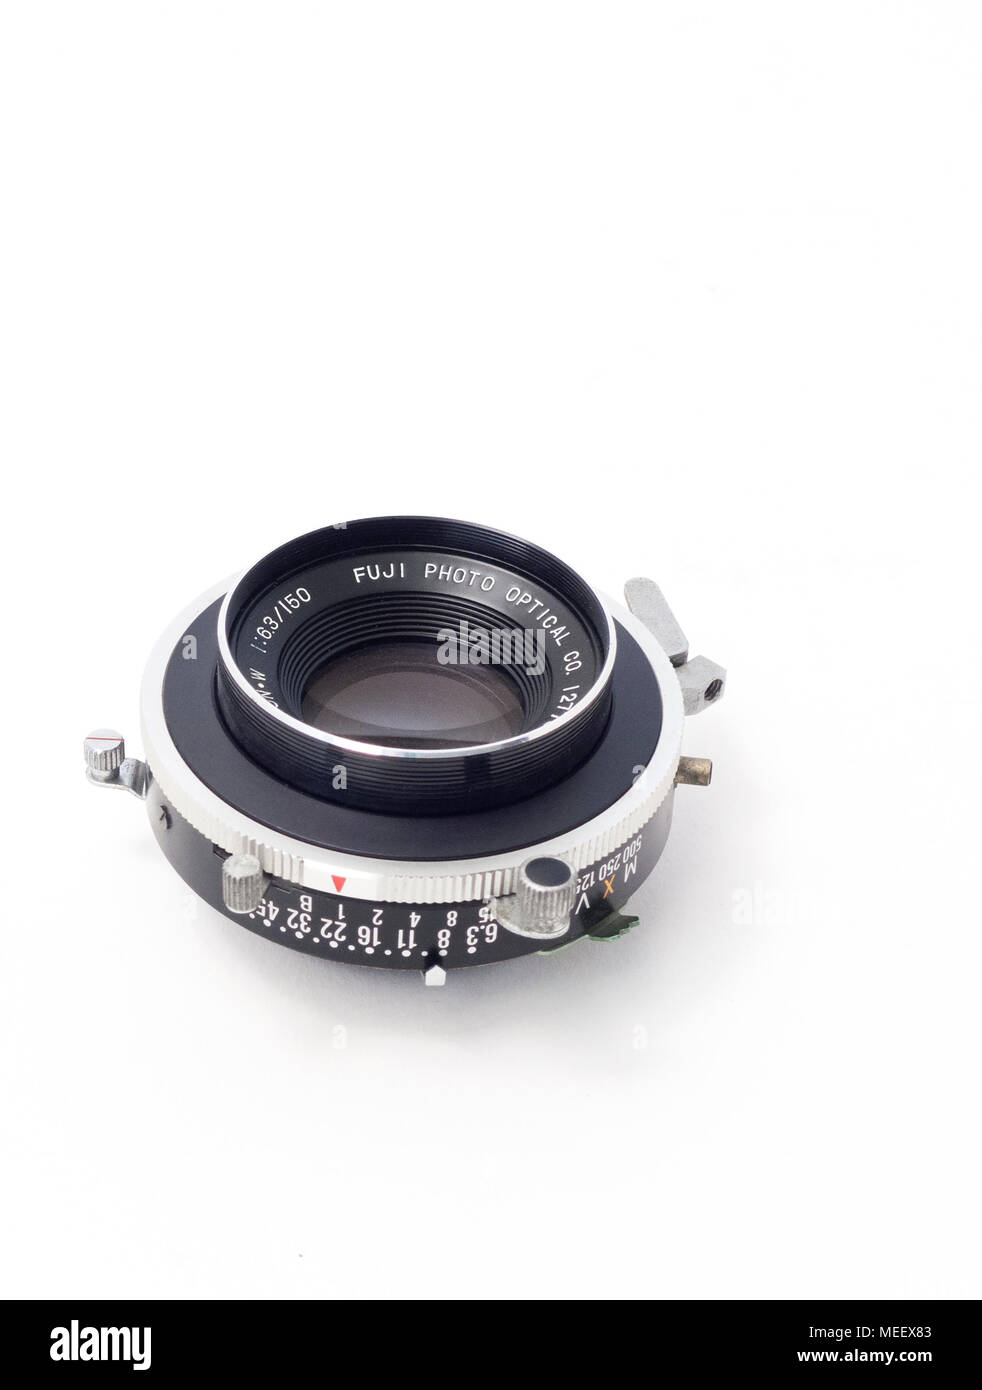 Fujinon-W 150mm f/ large format photographic lens in a Seiko Shutter.  